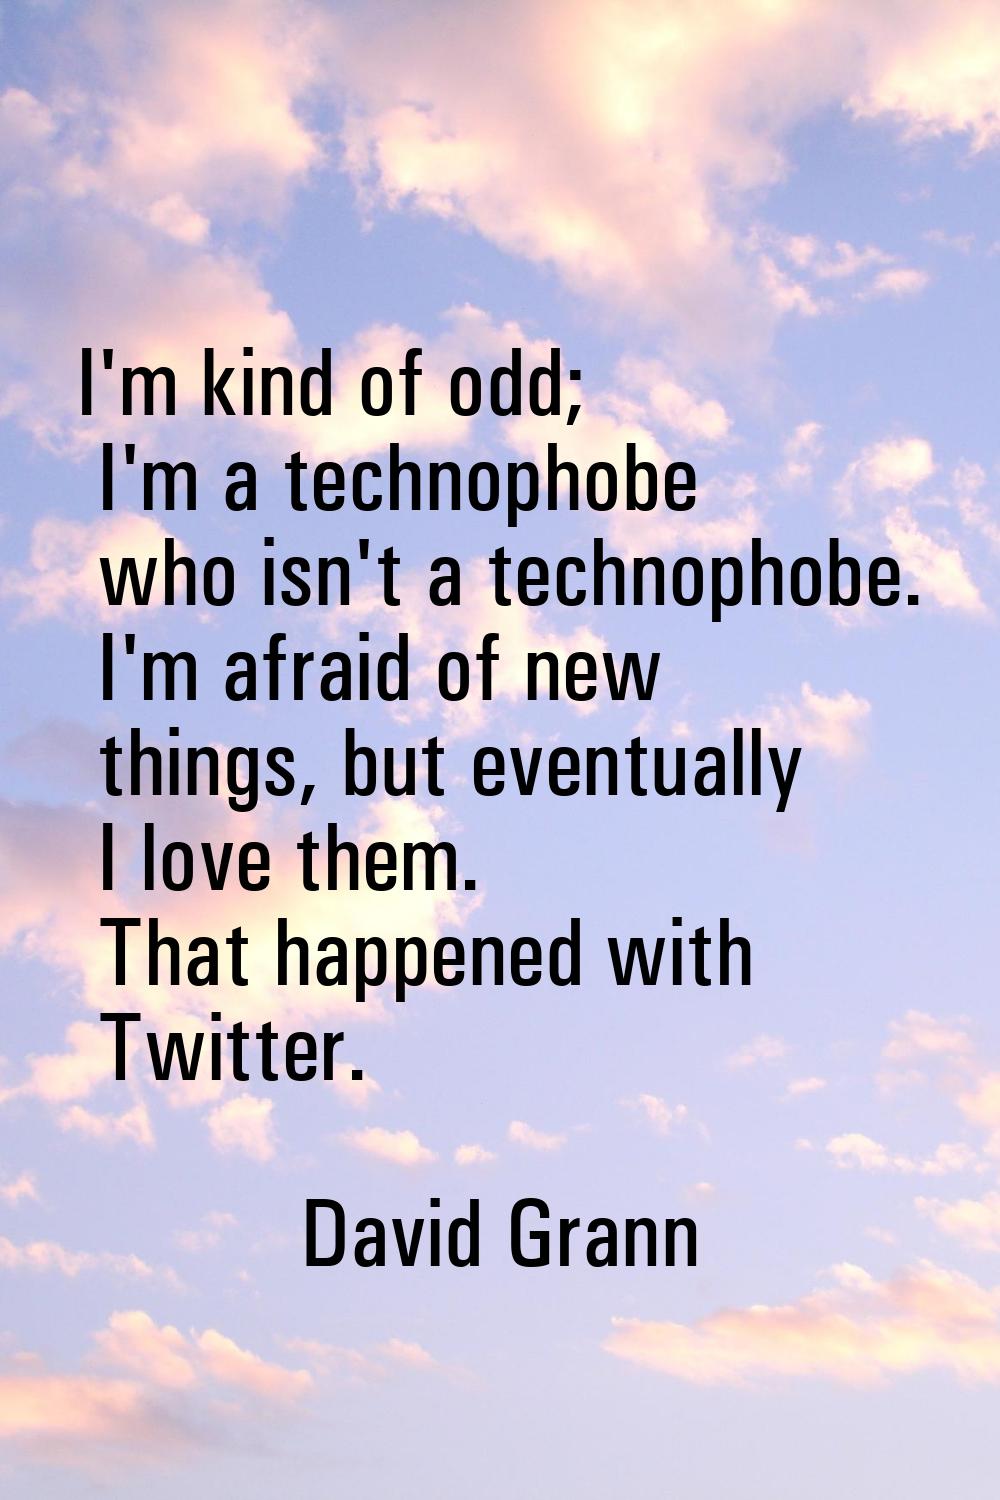 I'm kind of odd; I'm a technophobe who isn't a technophobe. I'm afraid of new things, but eventuall